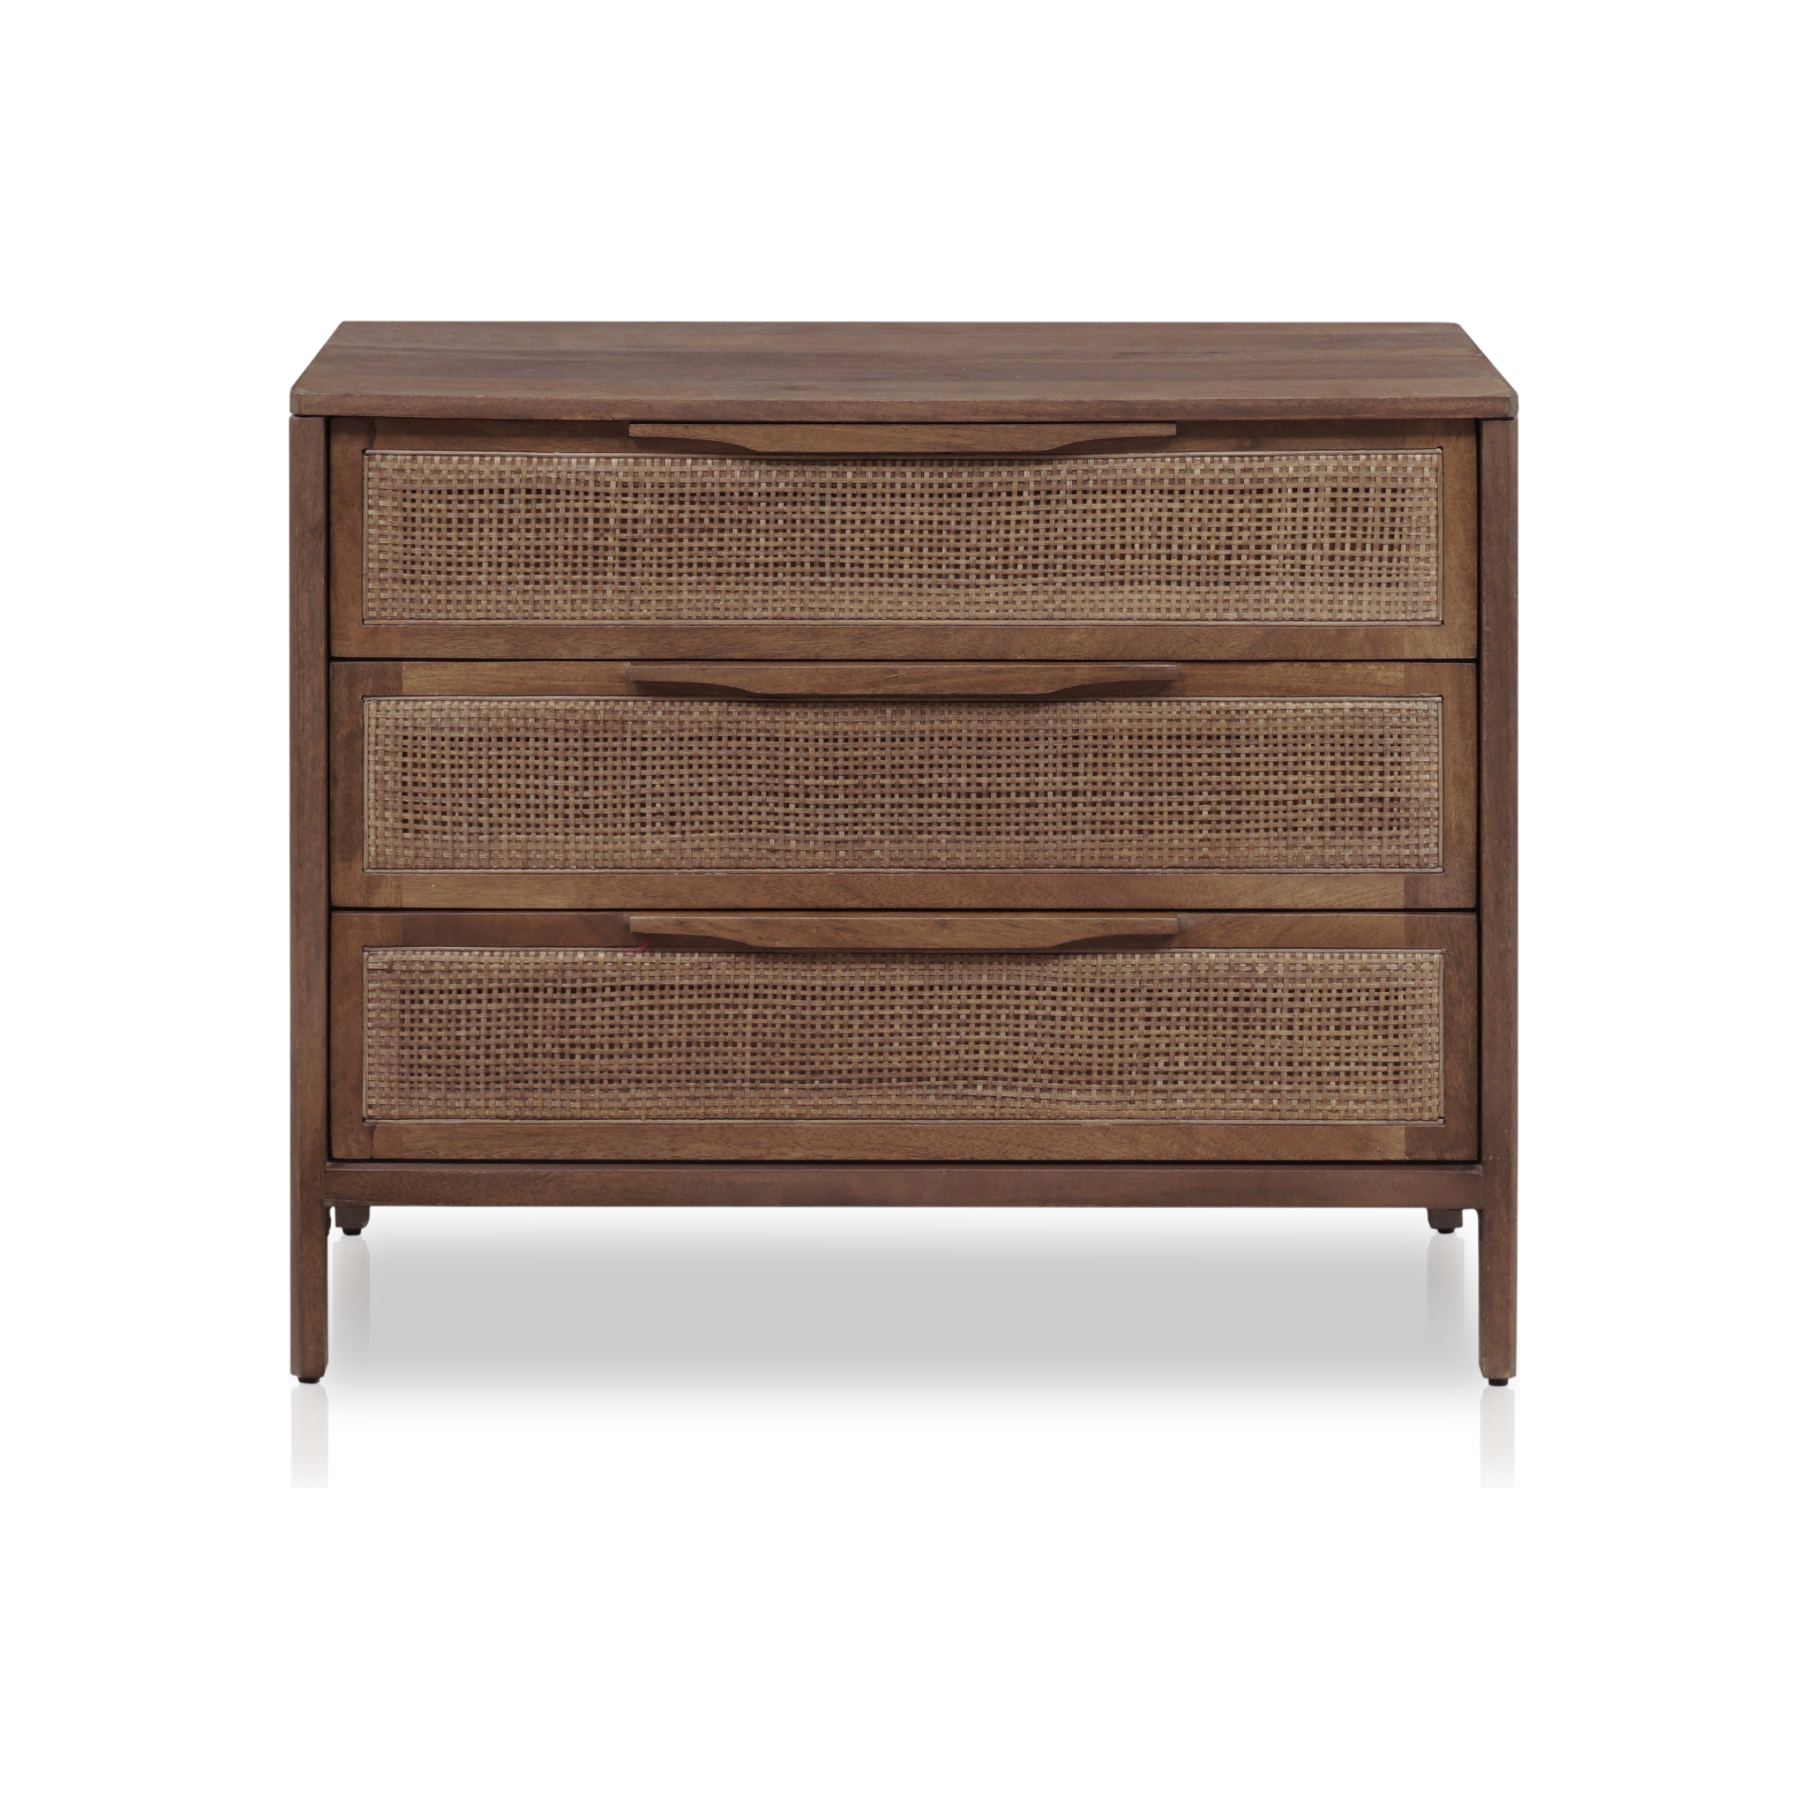 Brown wash mango frames inset woven cane, for a light, textural look with organic allure. Three spacious drawers provide plenty of closed storage. Amethyst Home provides interior design, new construction, custom furniture and area rugs in the Omaha metro area